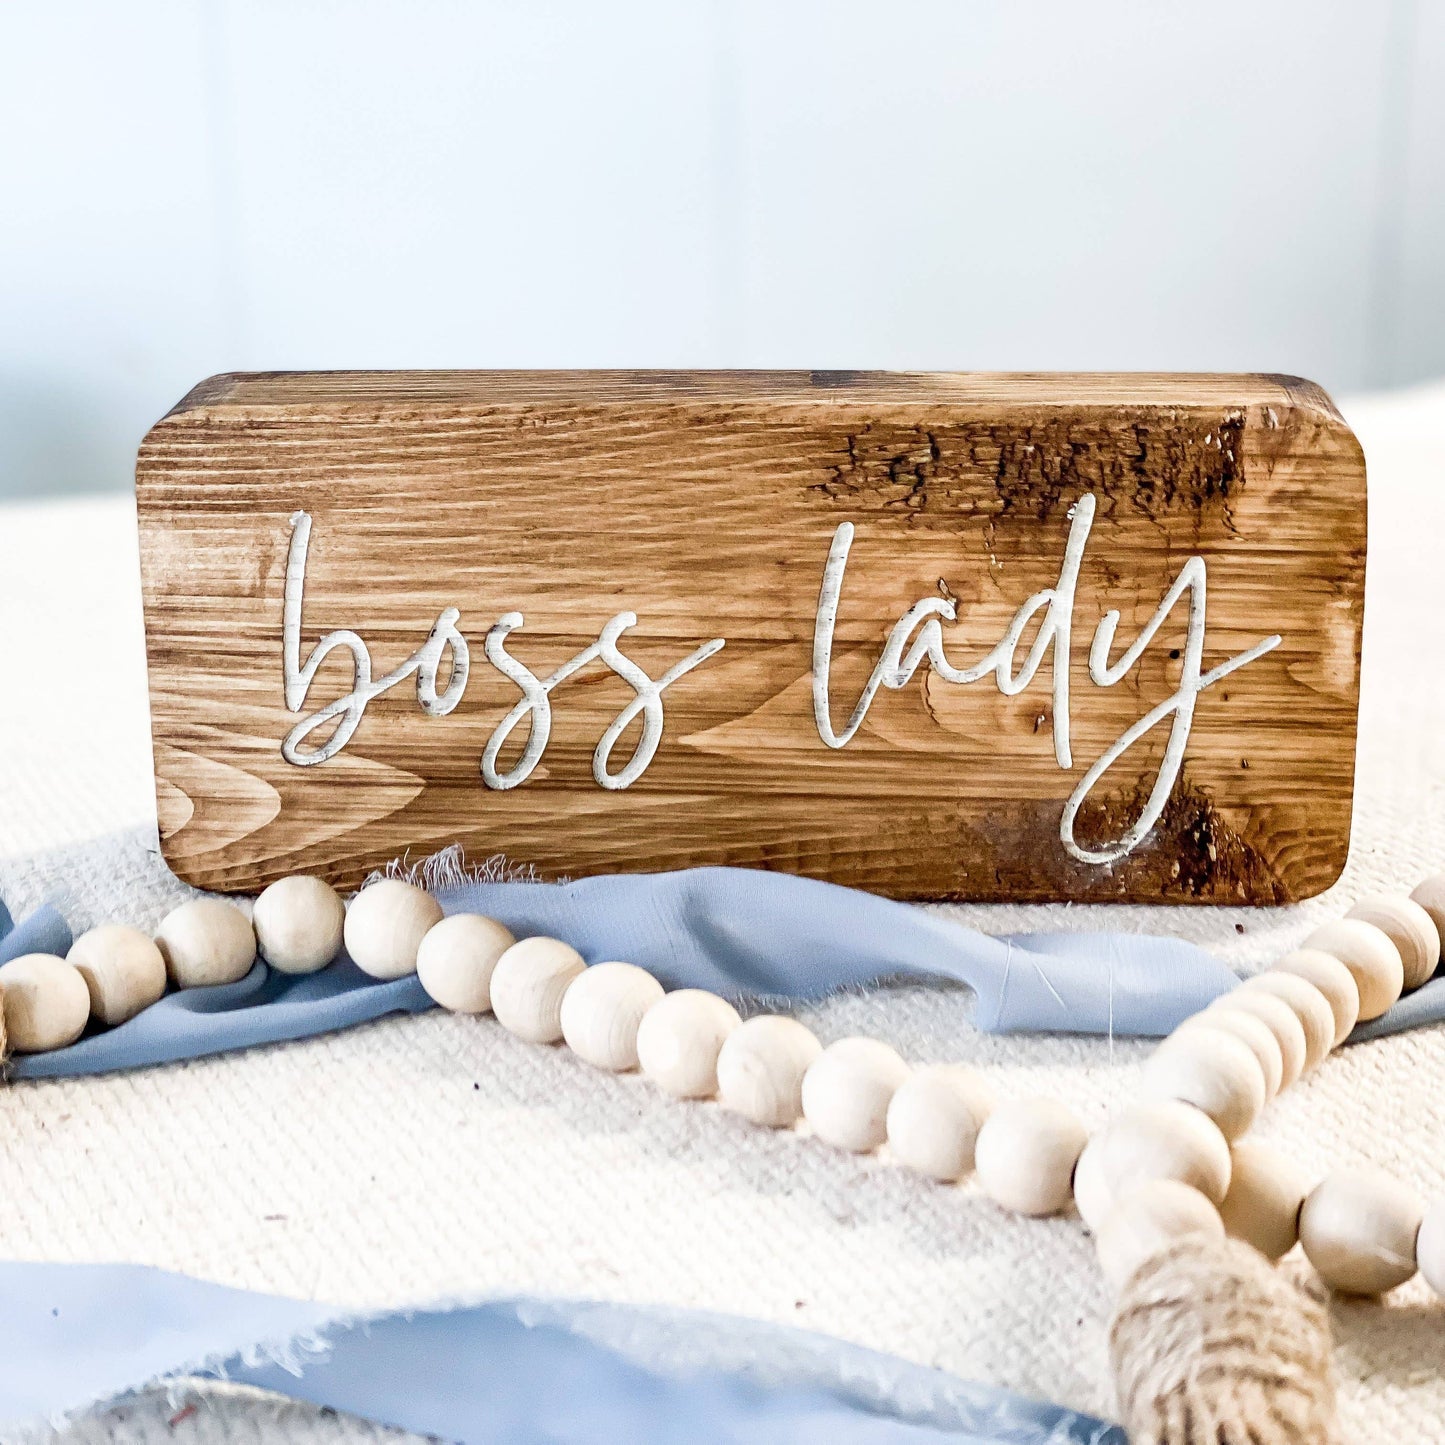 Boss Lady Wood Stained Block Sign